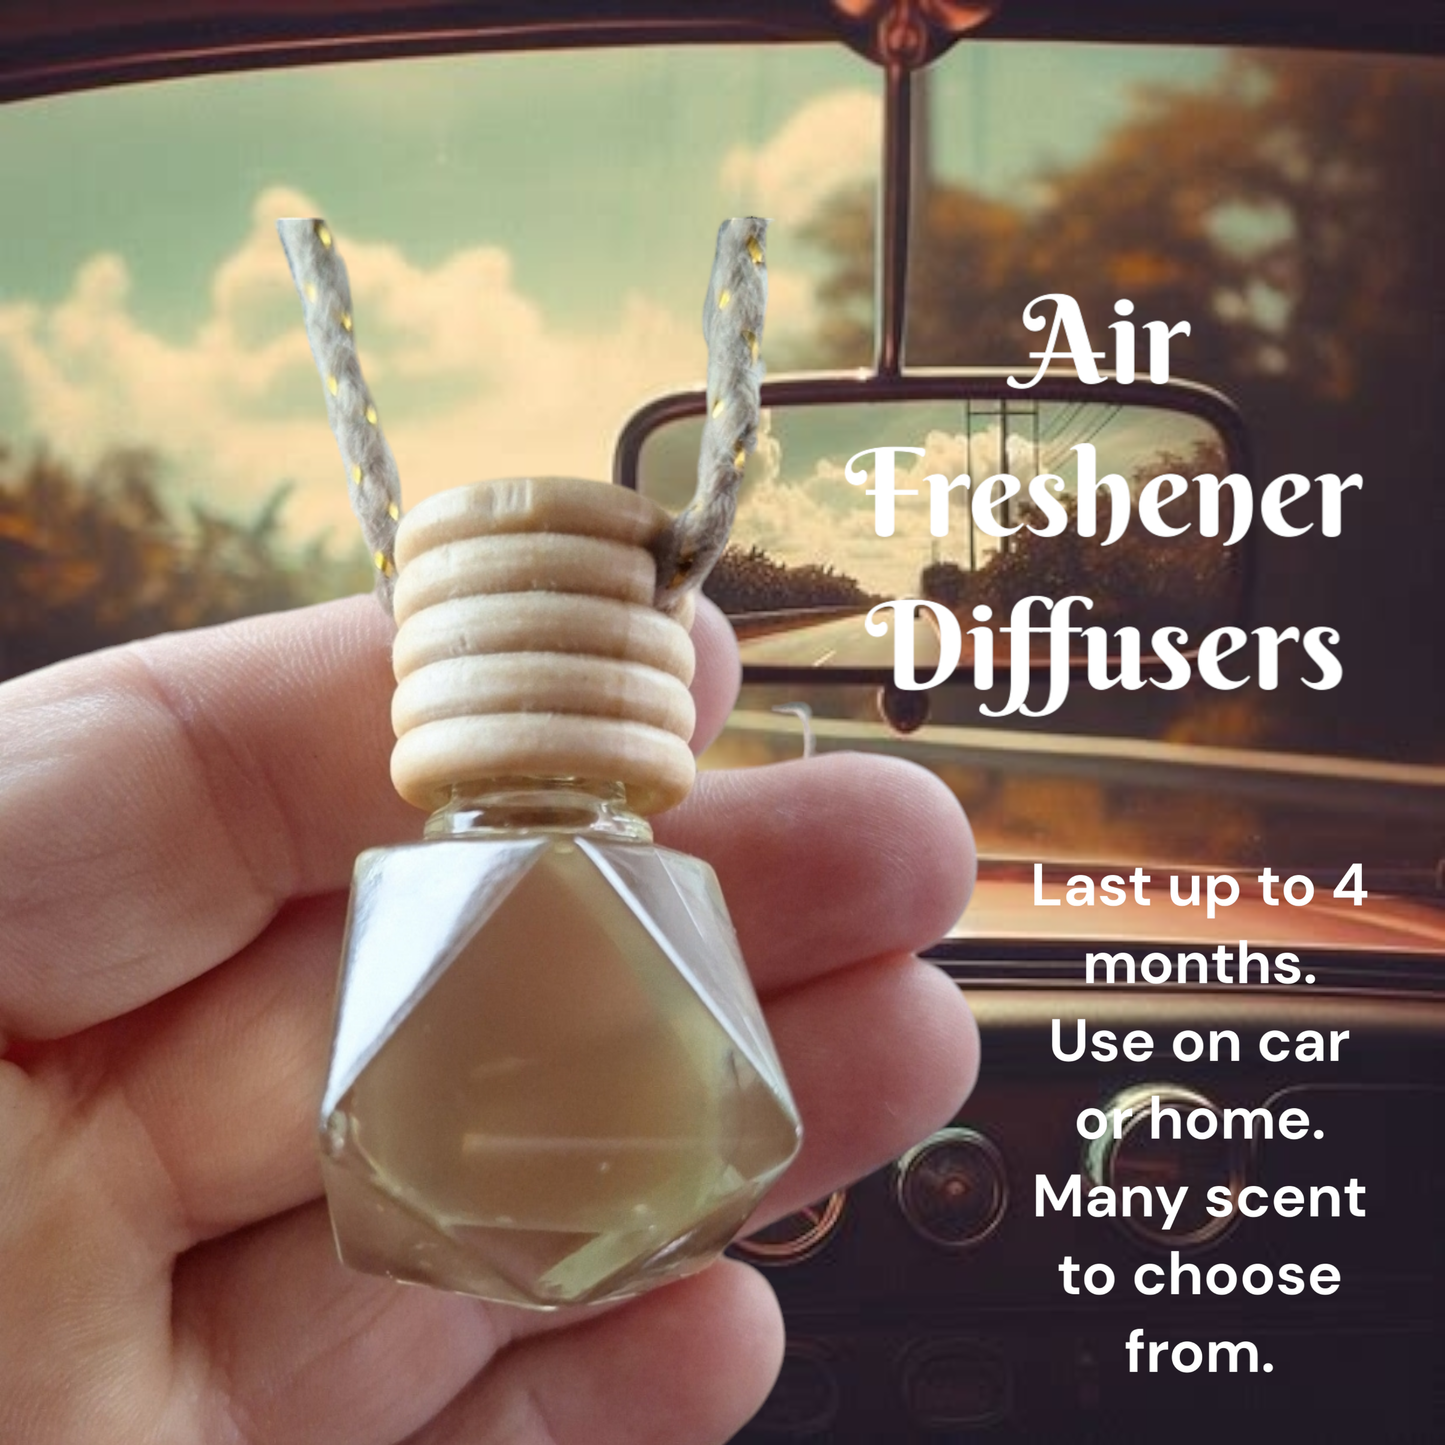 Spiced Apple Pear Air Freshener Diffuser for your car or home.